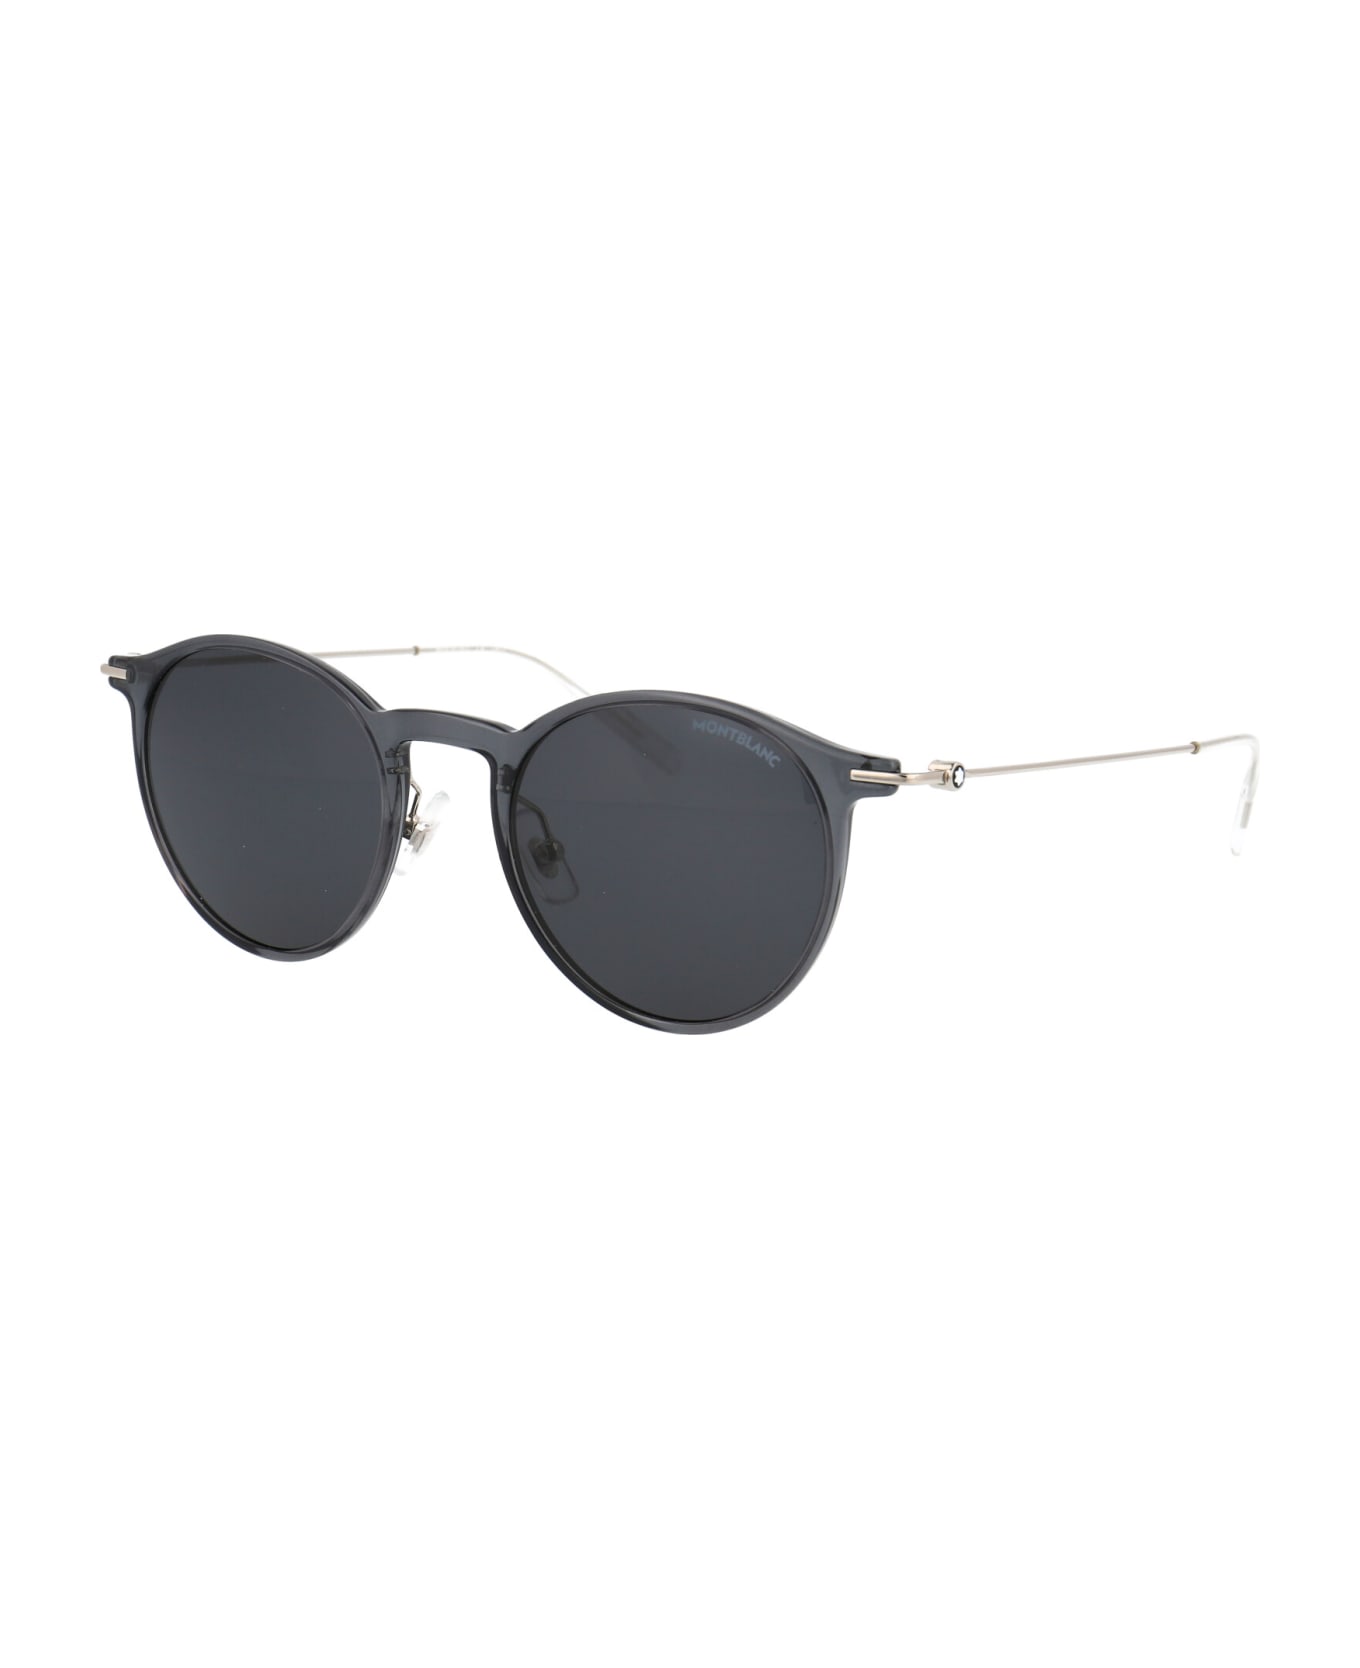 Montblanc Mb0097s Sunglasses - 001 GREY SILVER GREY